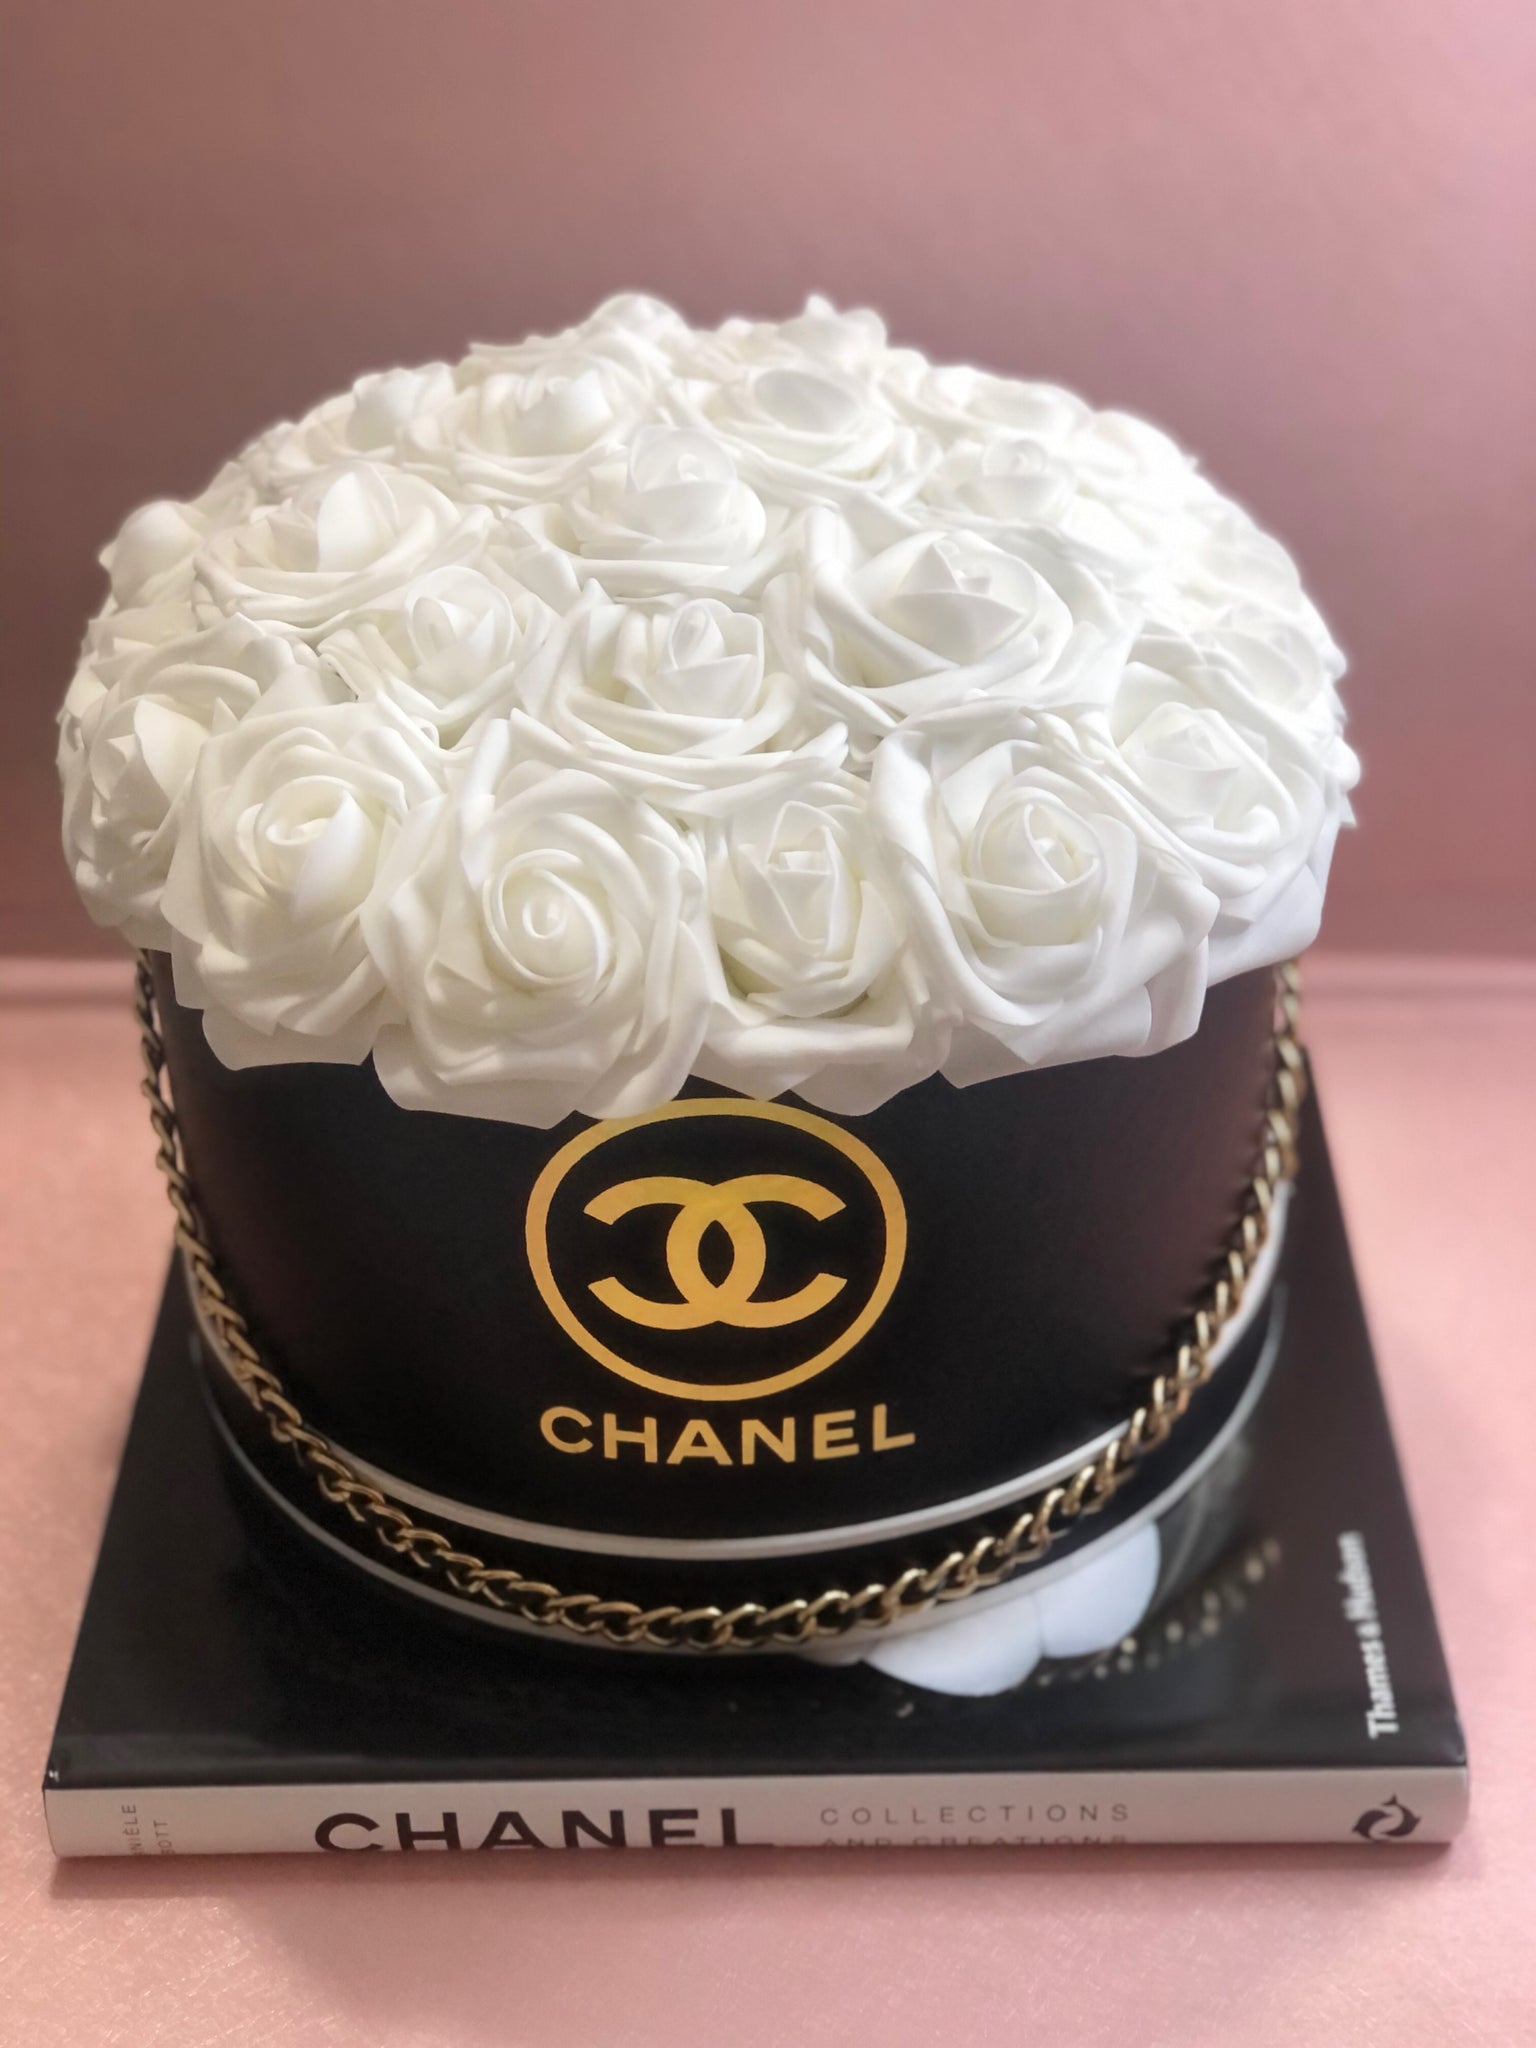 Chanel White Rose - Preserved Rose Bouquet – Aurora Blooms